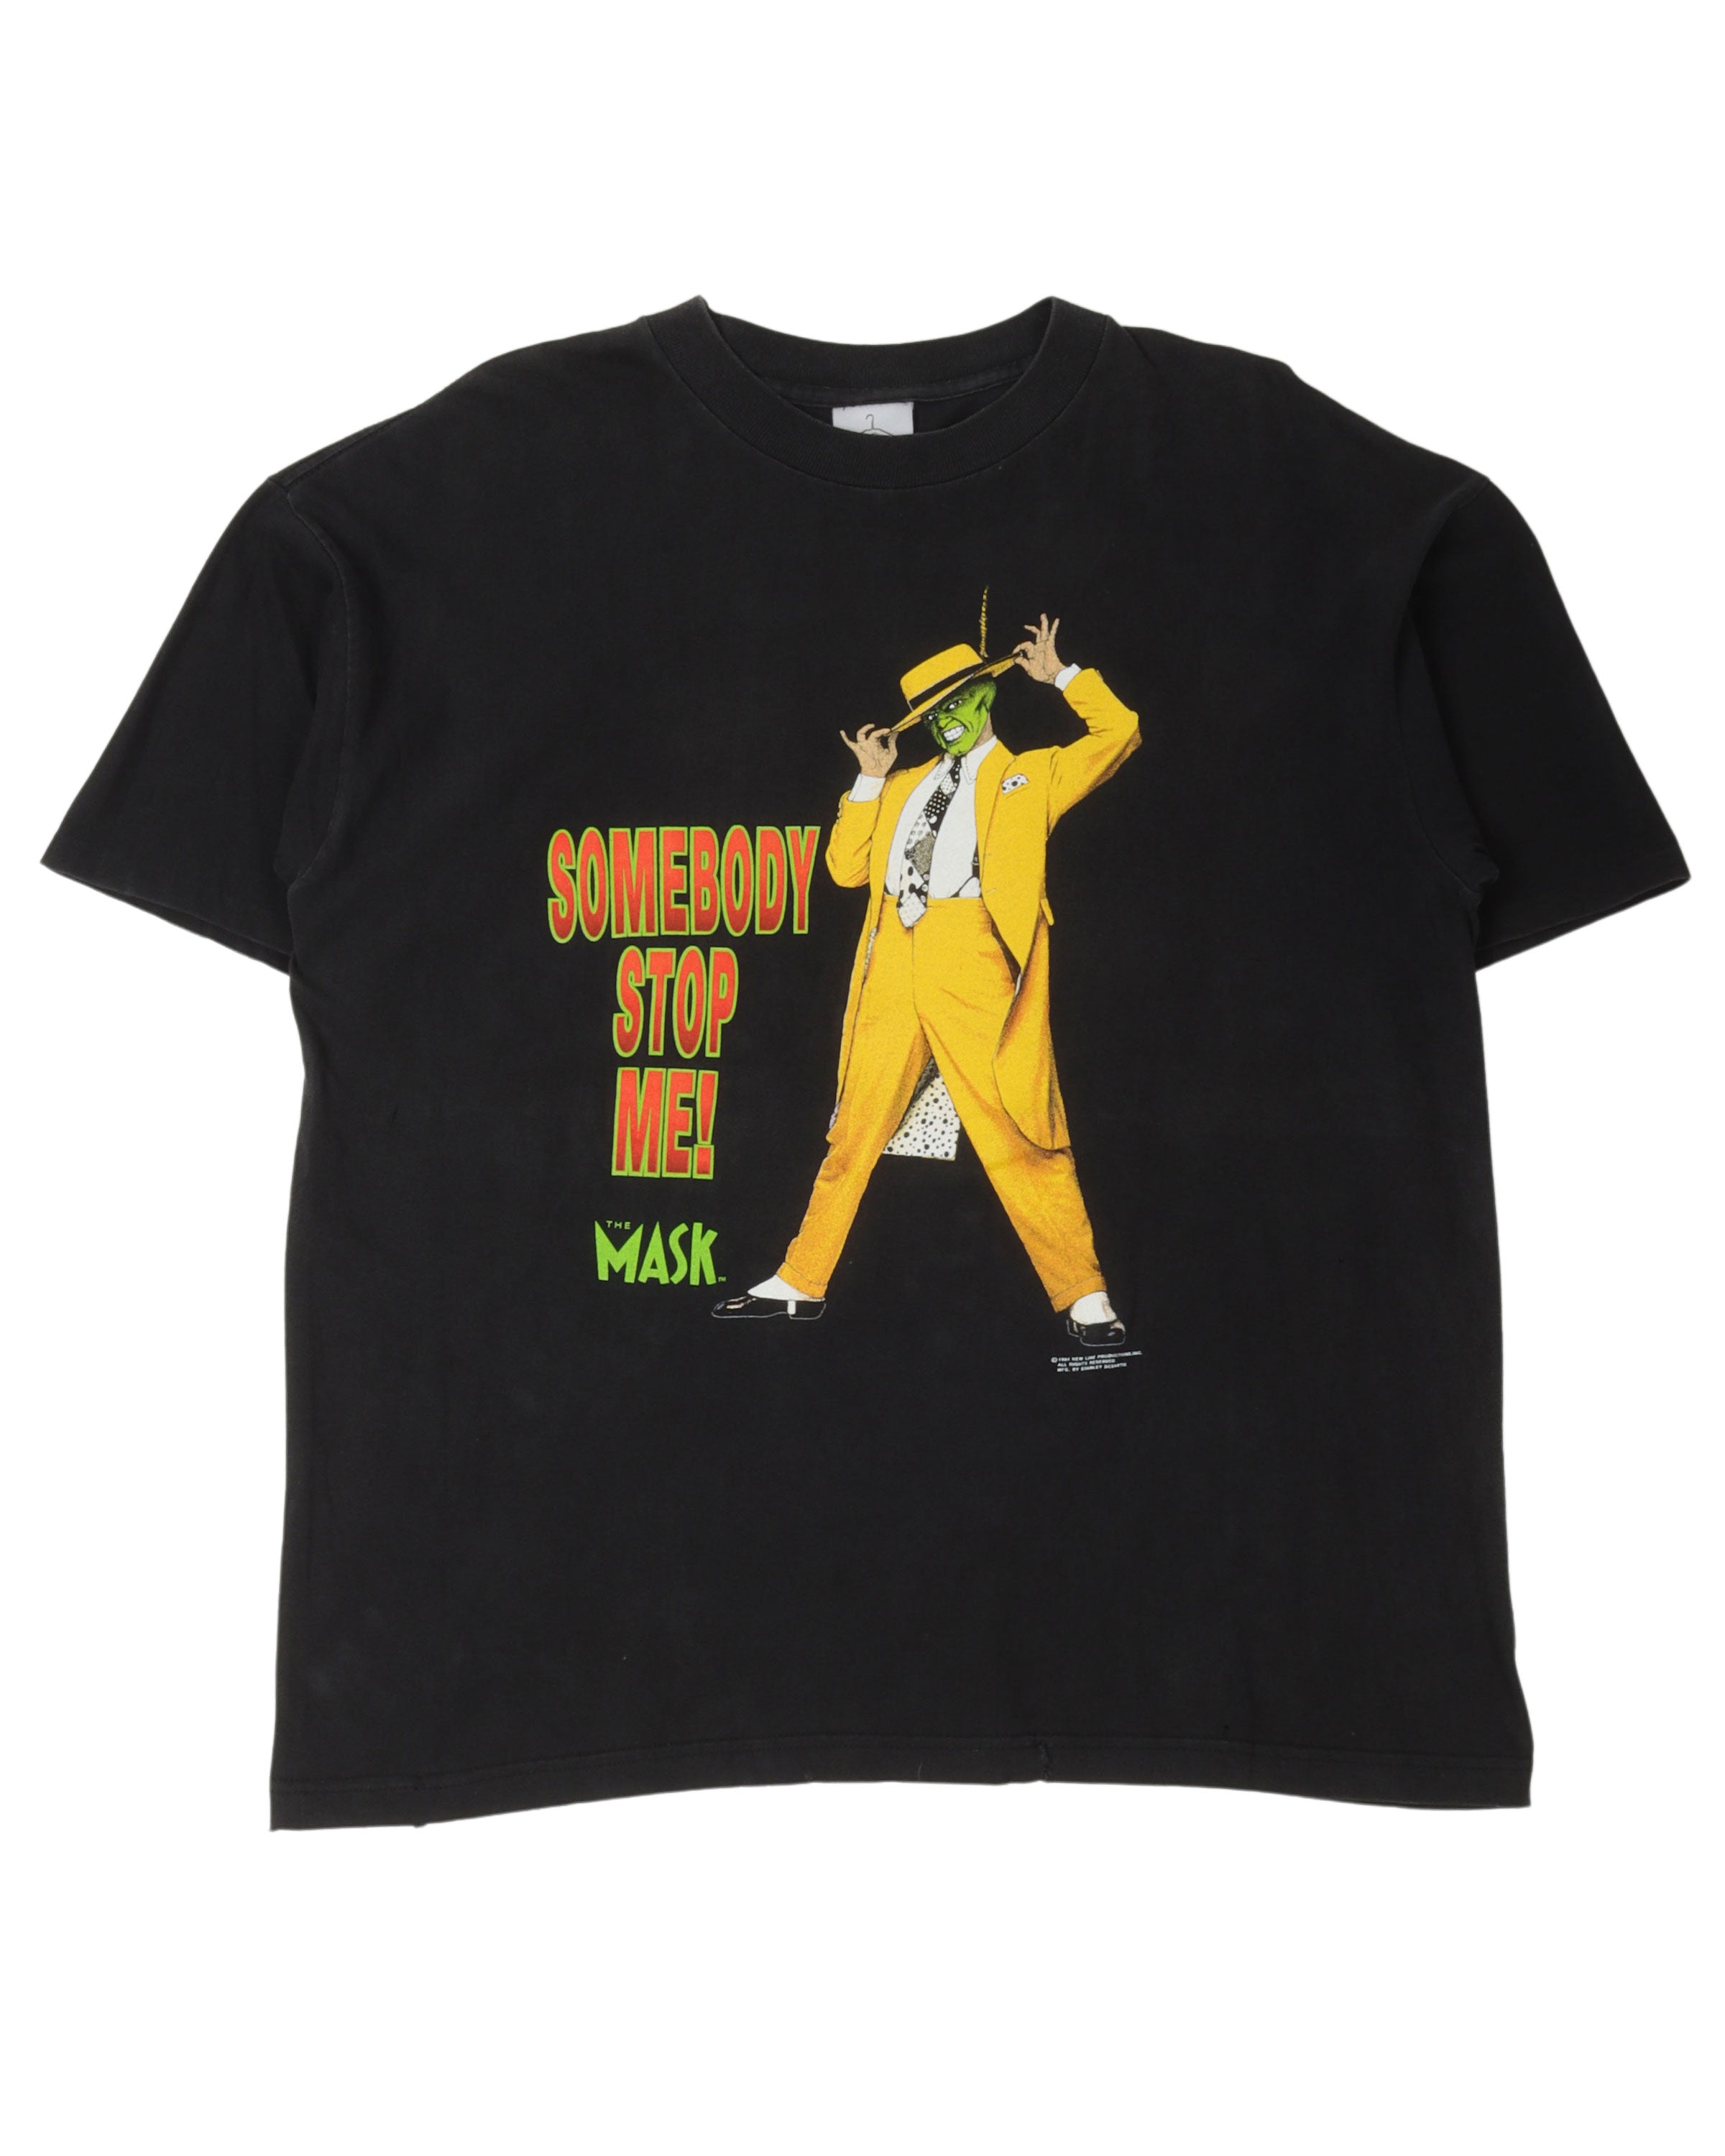 The Mask "Somebody Stop Me!" T-Shirt